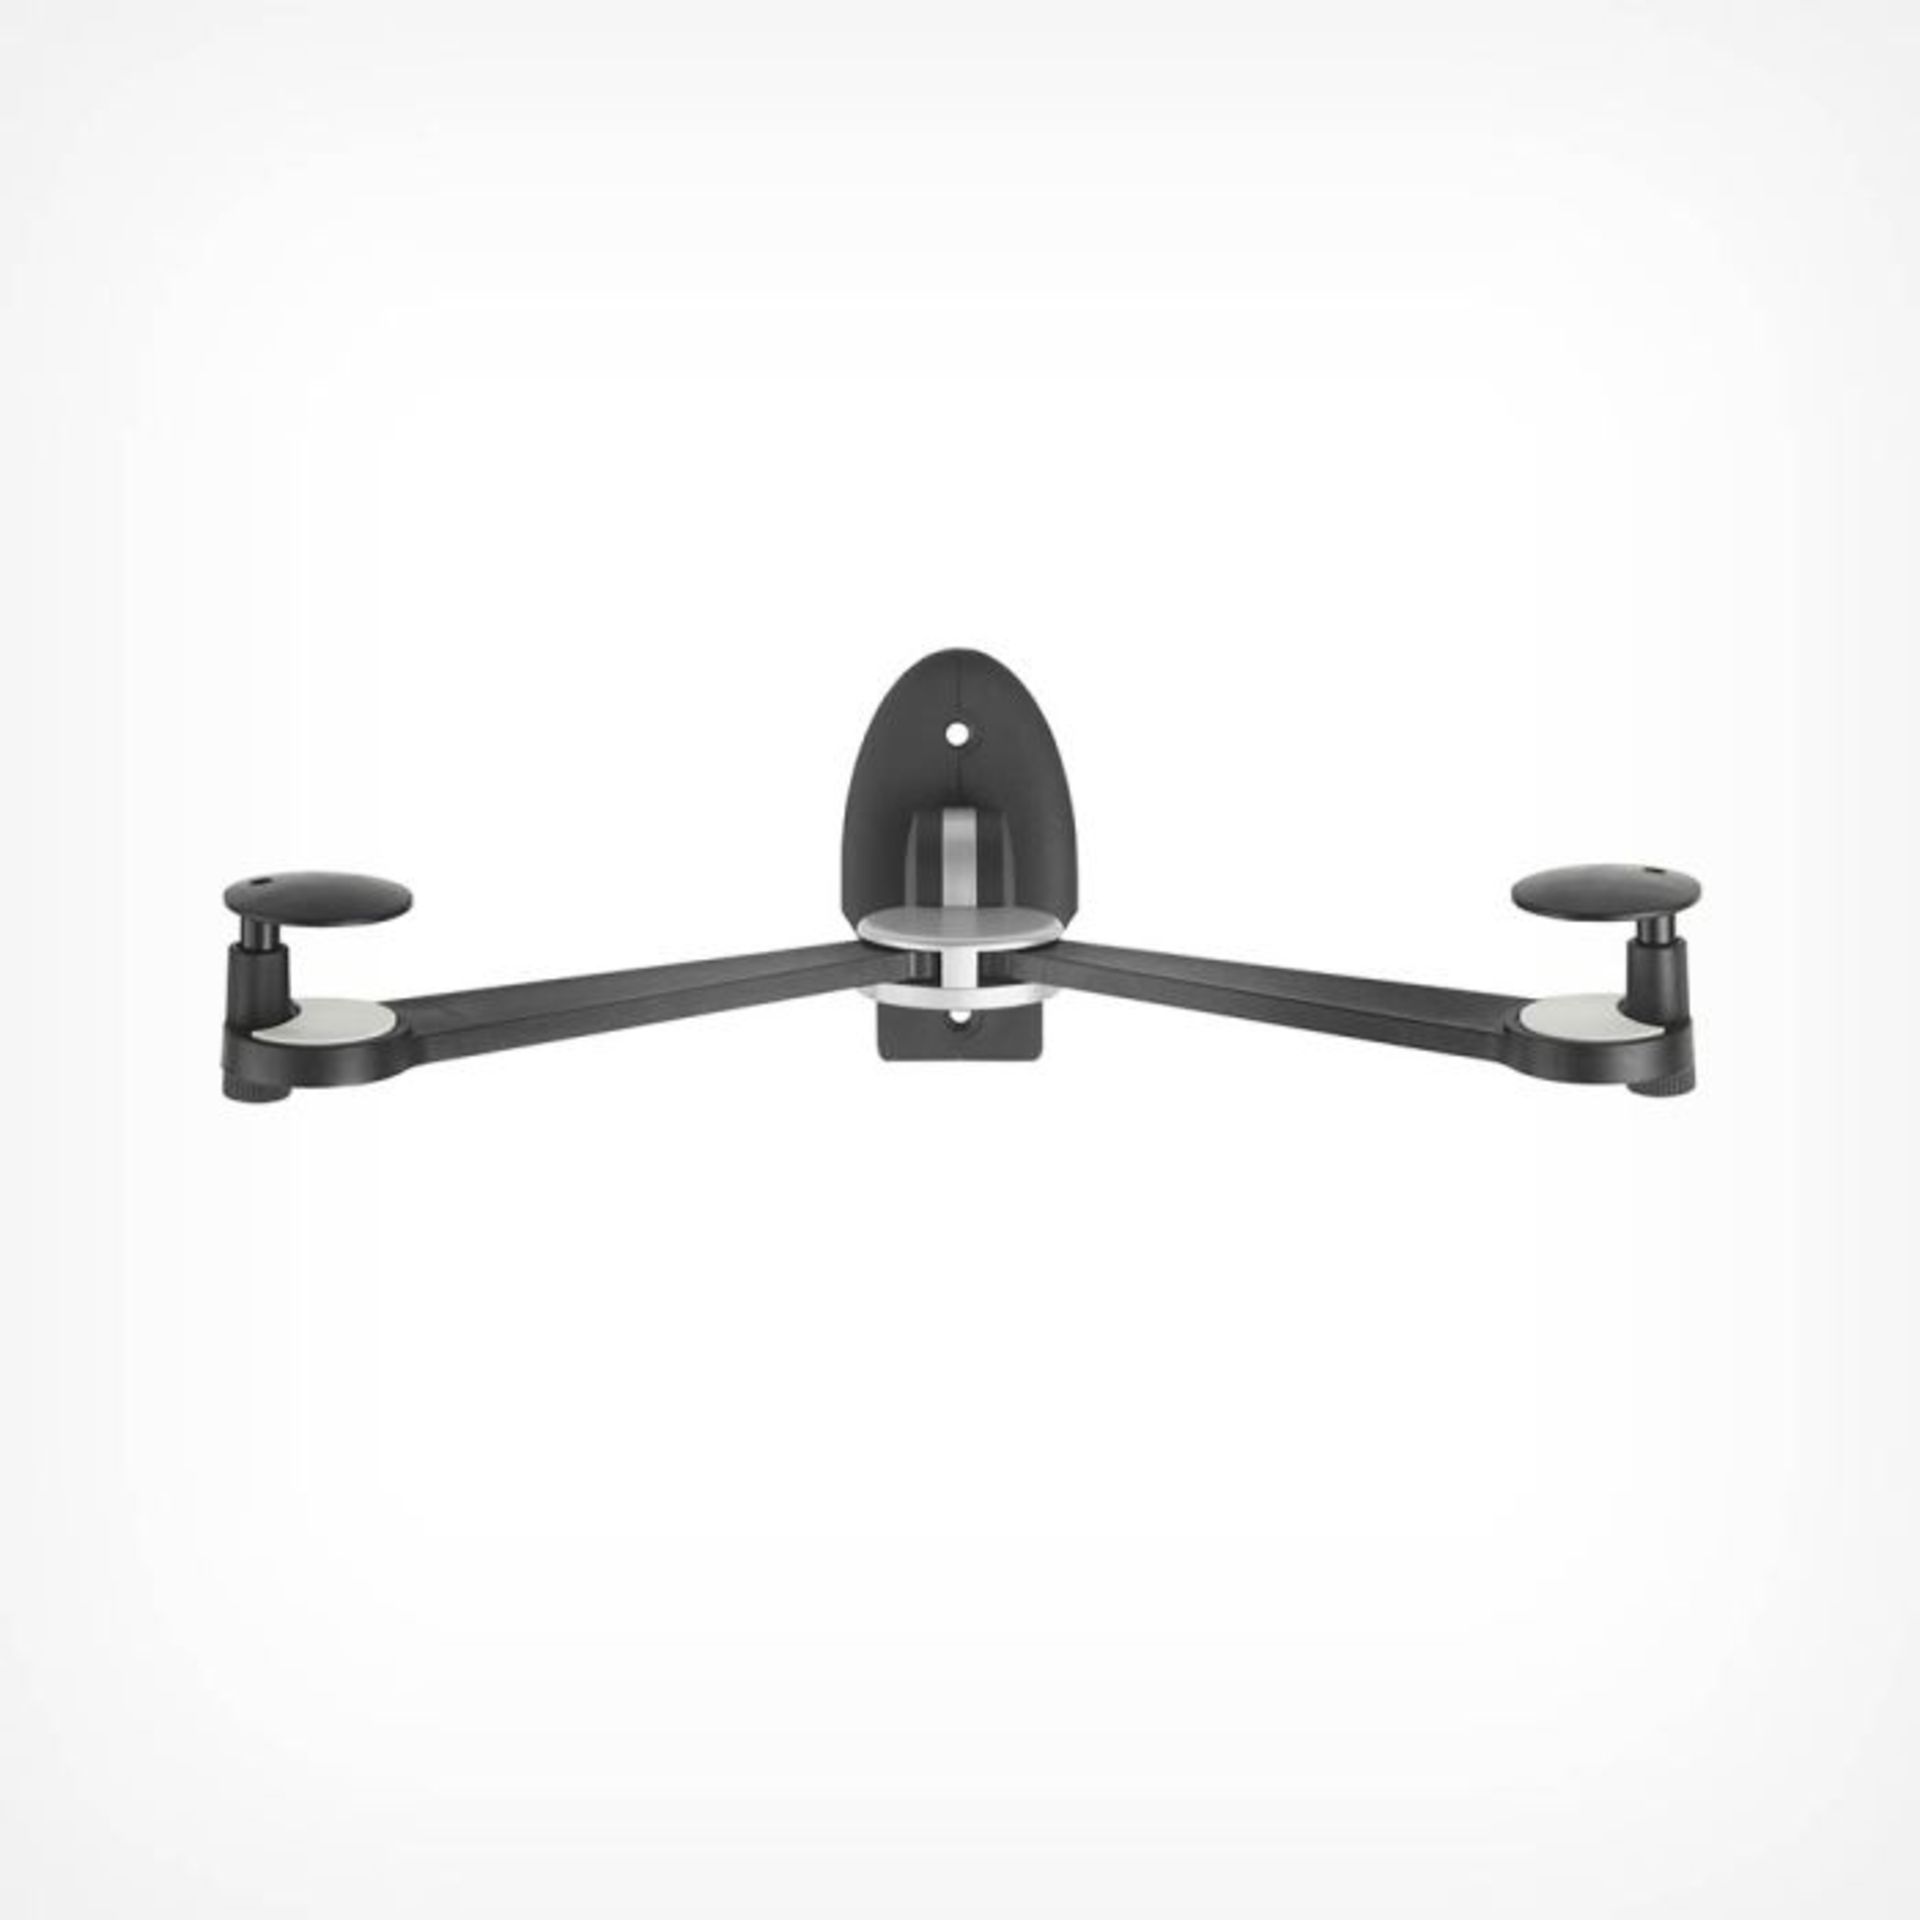 Adjustable TV Shelf Bracket. - PW. In addition to its movable clamps to keep your device securely in